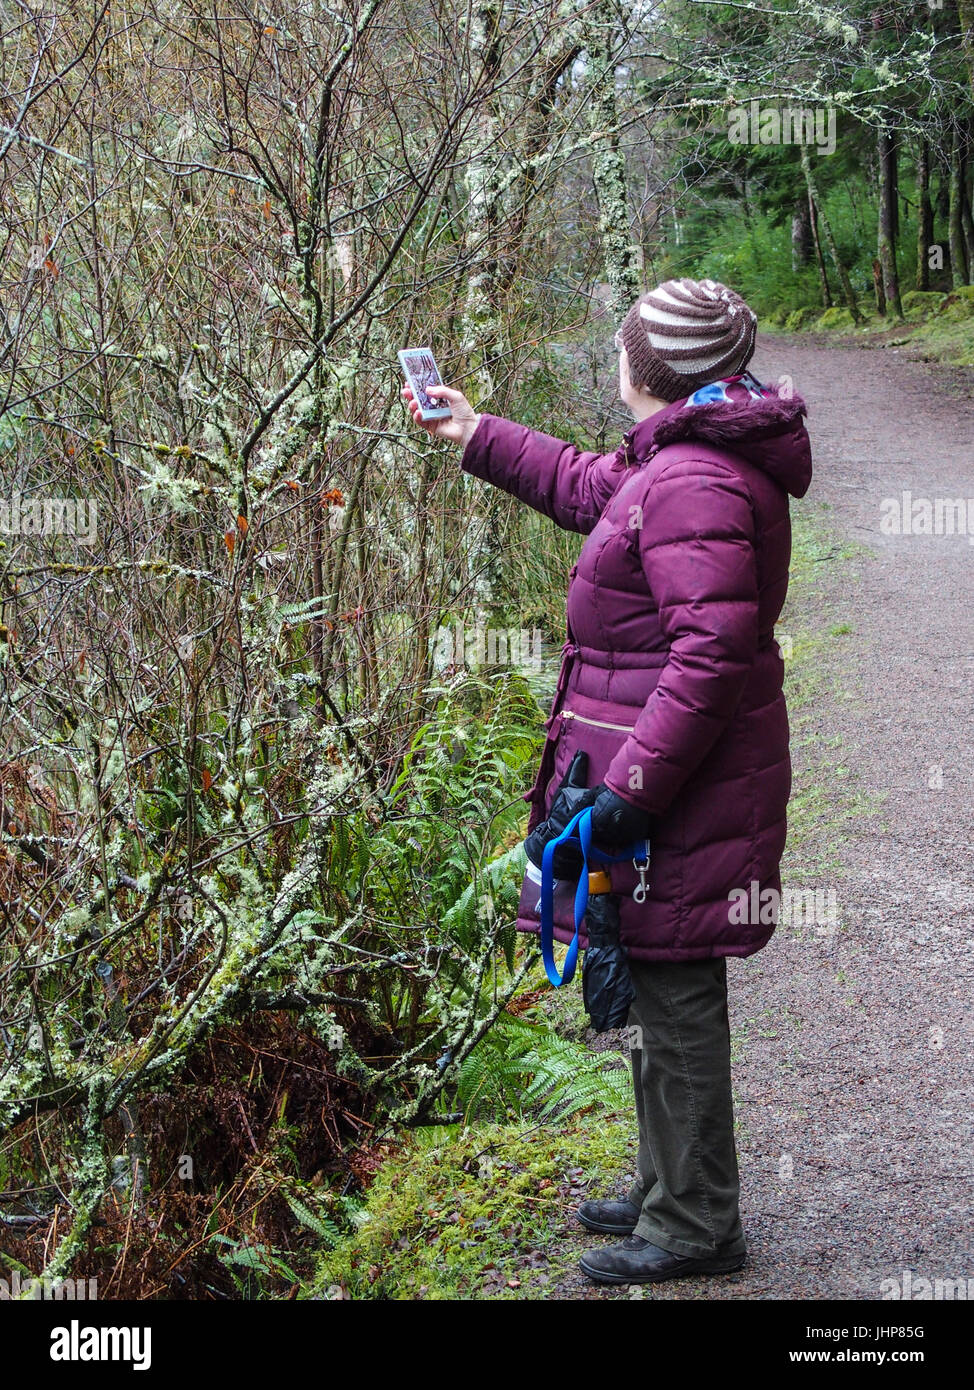 Woman taking photograph using mobile phone Stock Photo